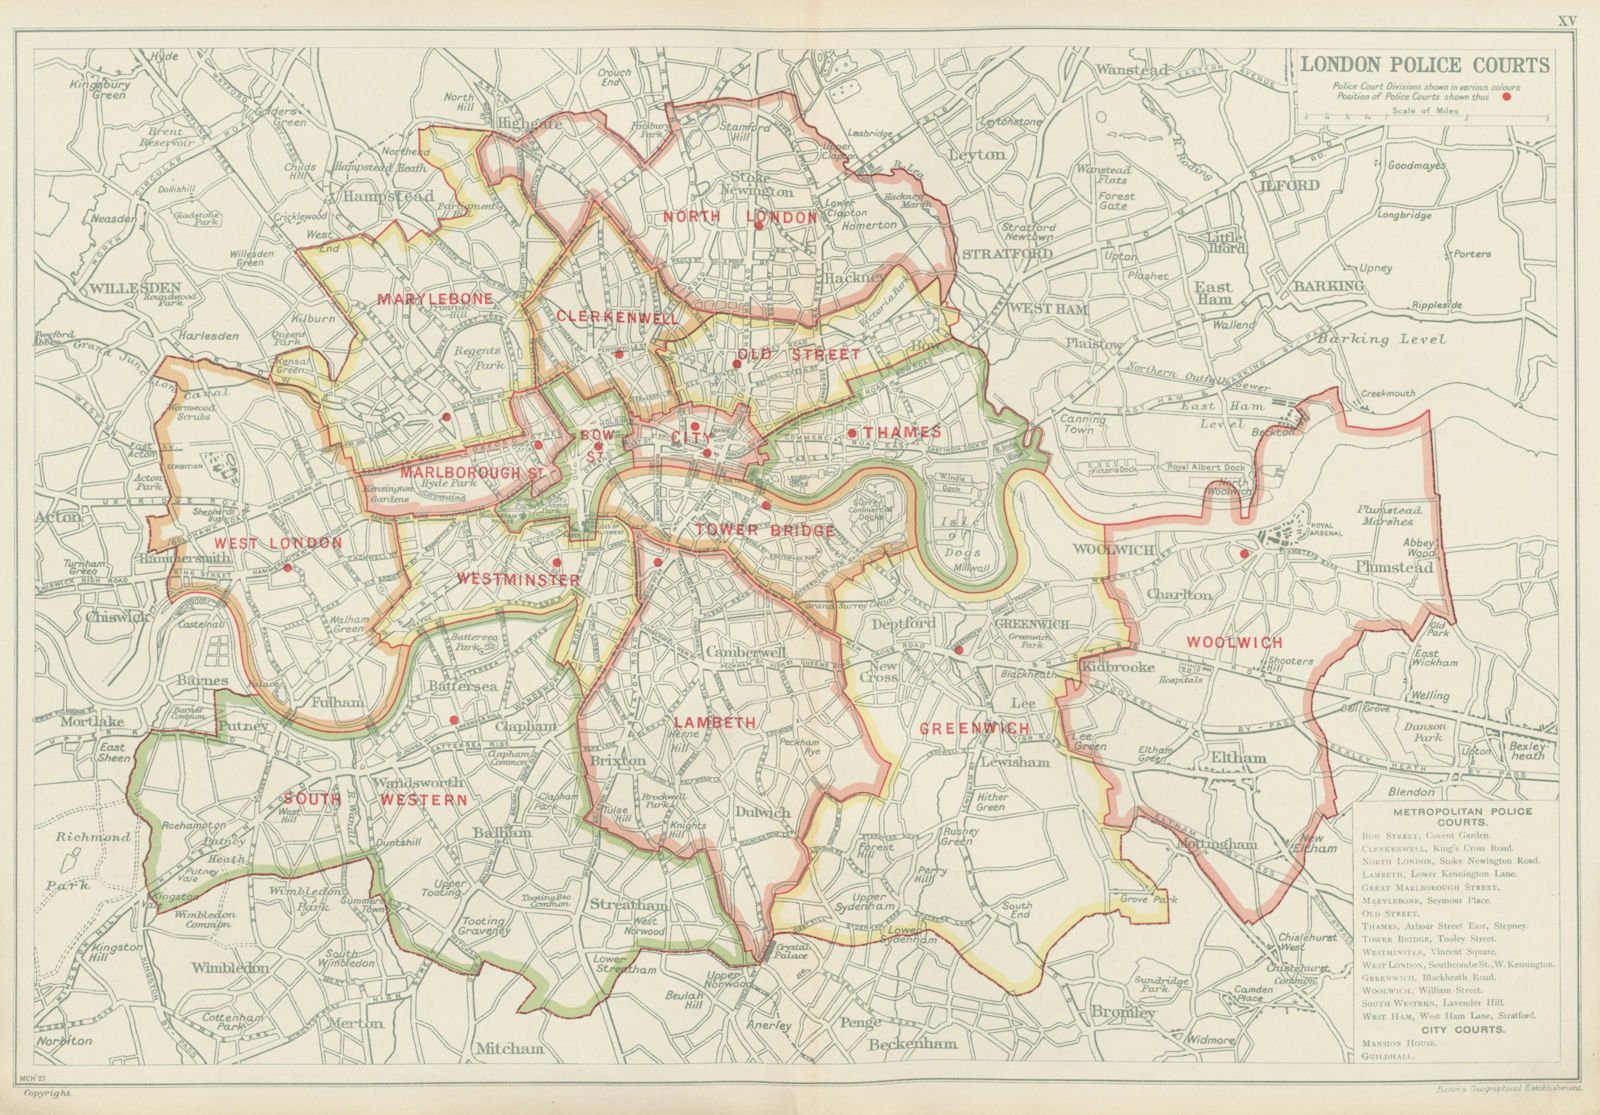 Associate Product LONDON POLICE COURTS. Showing divisions & court locations. BACON 1934 old map